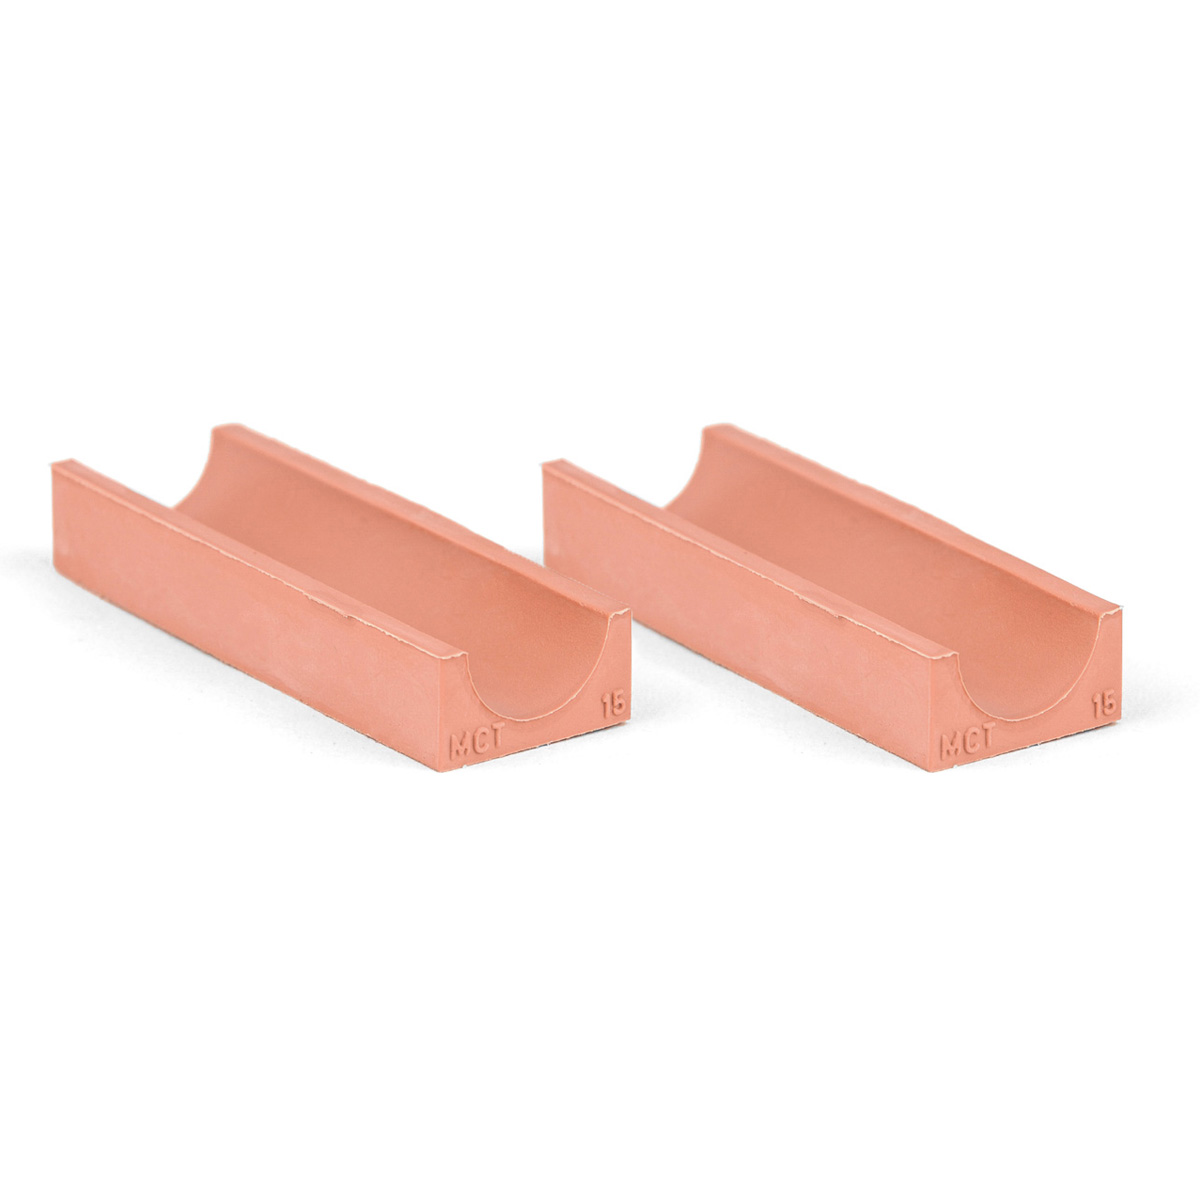 20-15*2 Set of 2 half insert block lycron, 20-15 for cable/pipe diam. 14.5-15.5mm